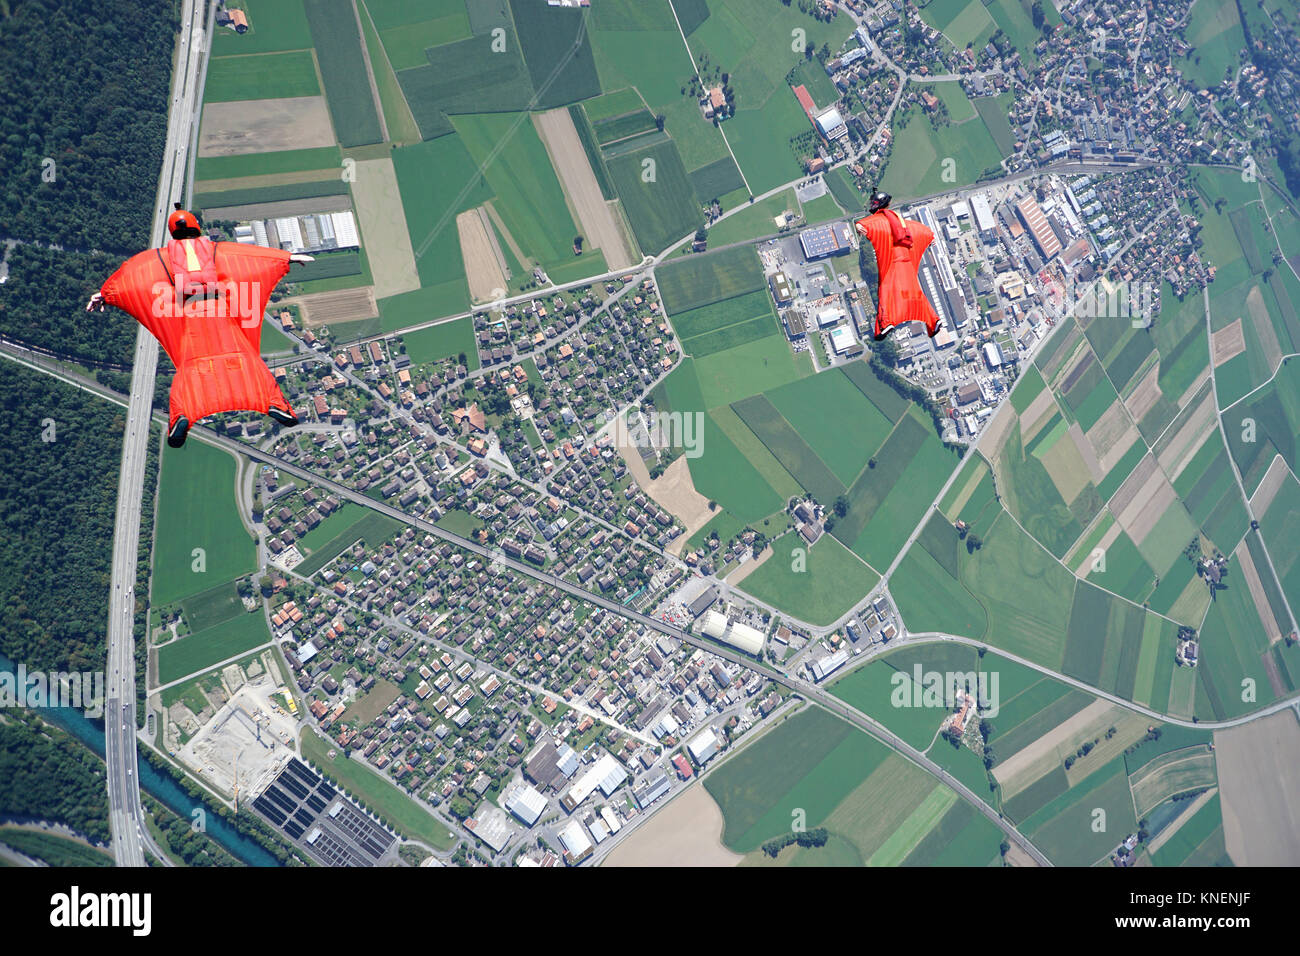 Aerial view of two wingsuit flyers in red suits flying above landscape Stock Photo